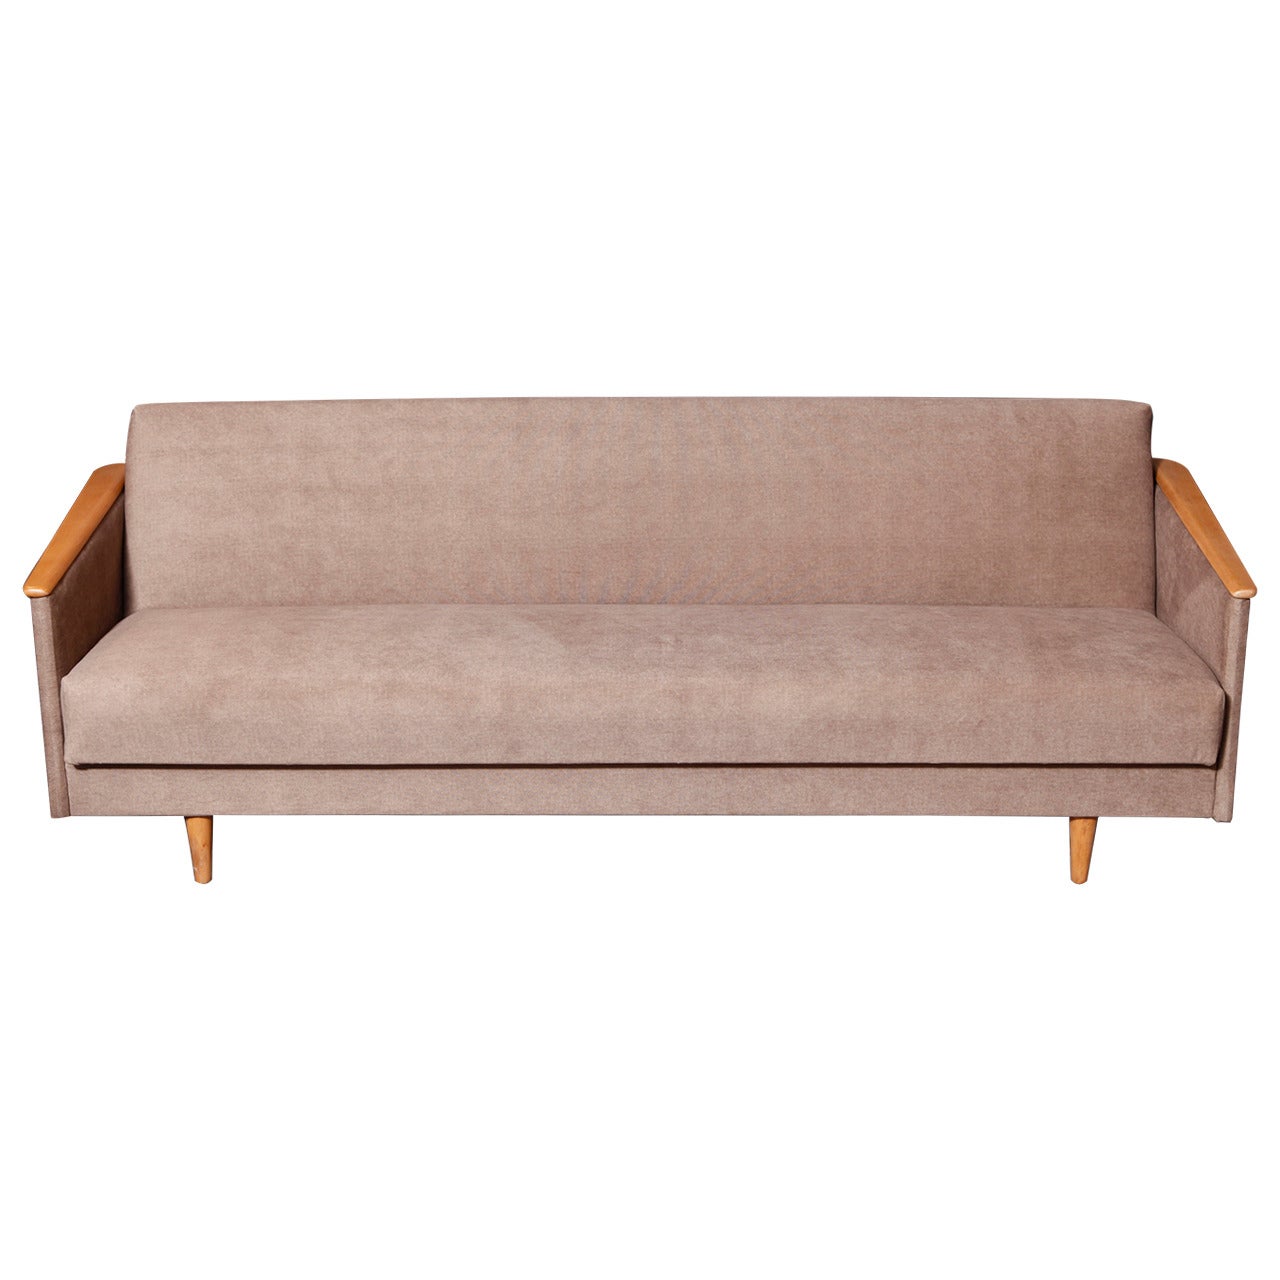 Convertible Sofa For Sale